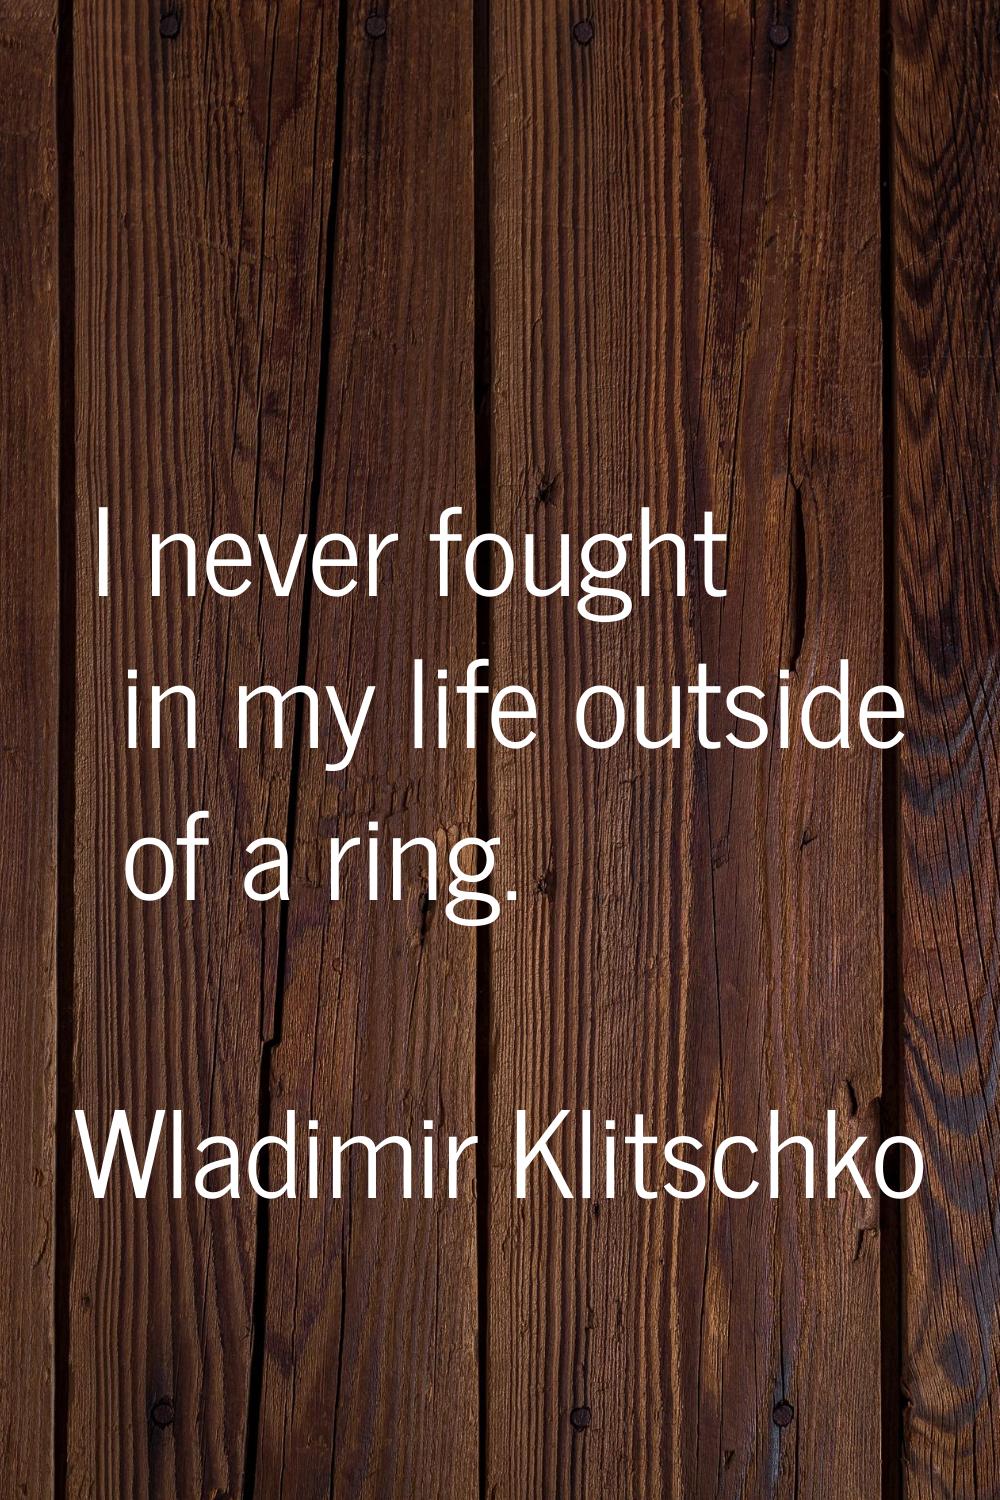 I never fought in my life outside of a ring.